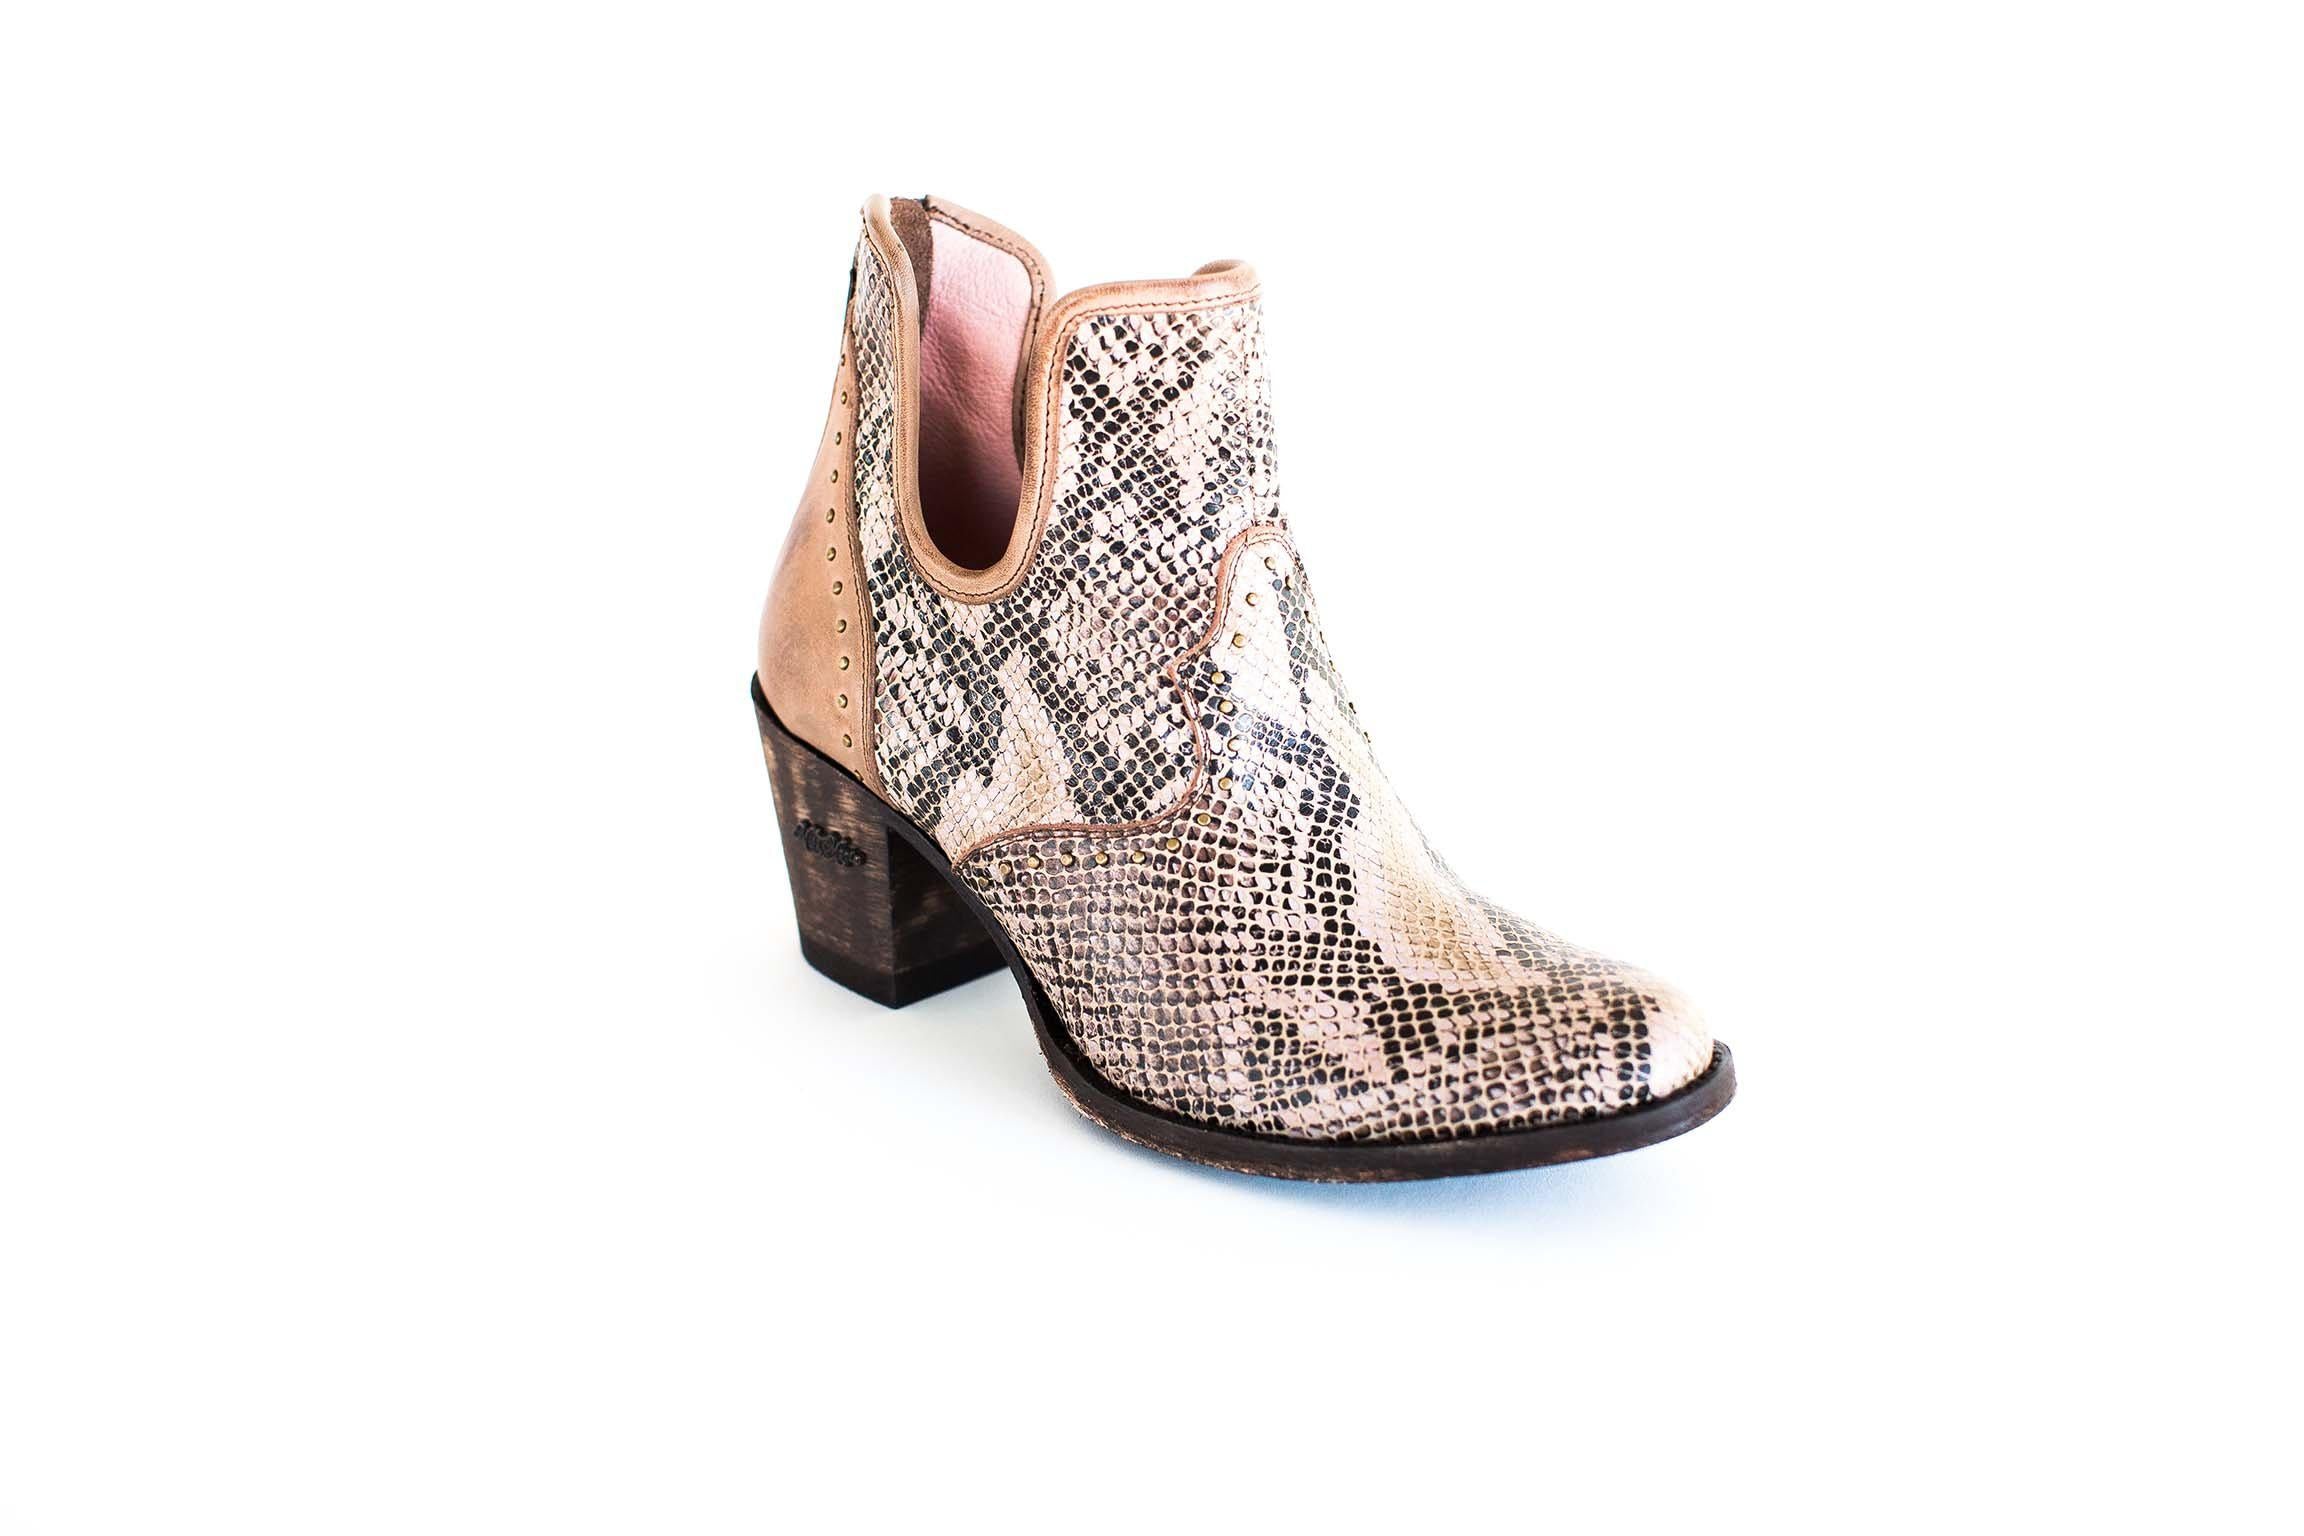 Miss Macie Boots Faith Collection - Honey Hush in Snake Skin